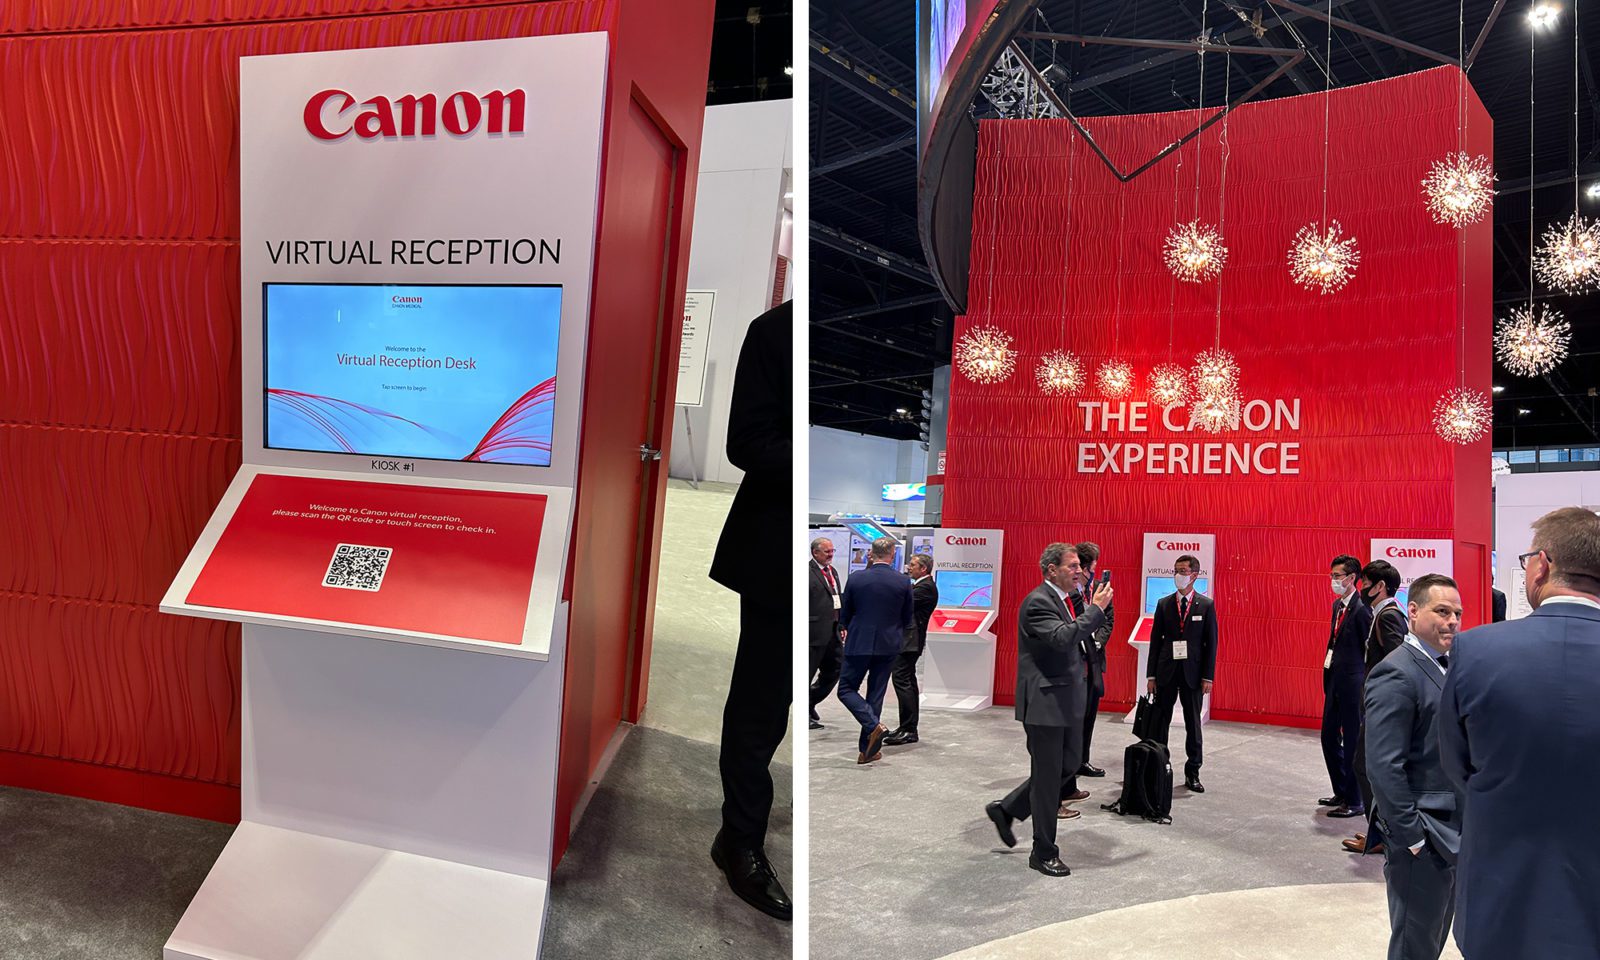 Canon's booth featured unique lighting fixtures